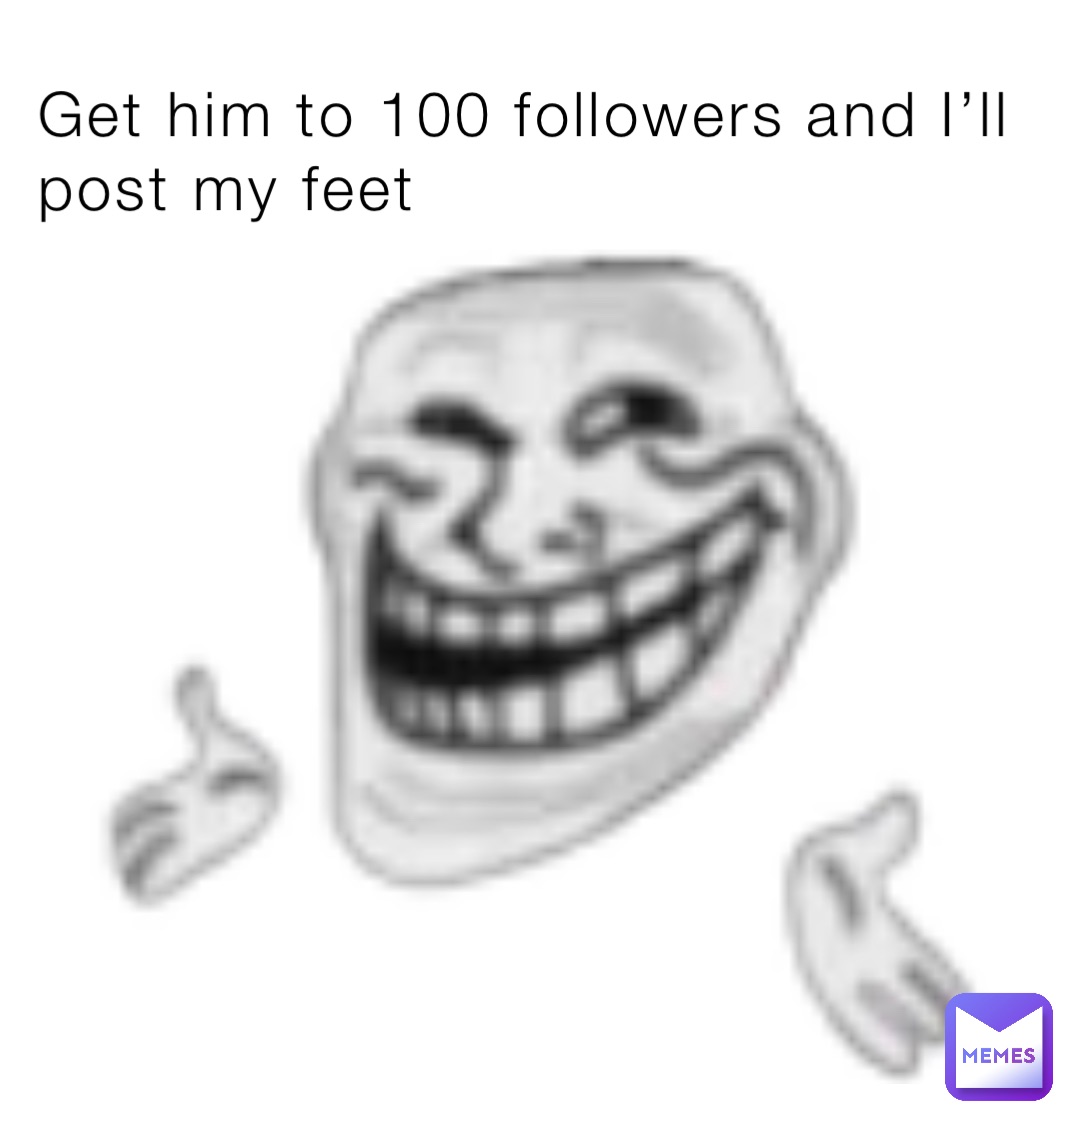 Get him to 100 followers and I’ll post my feet